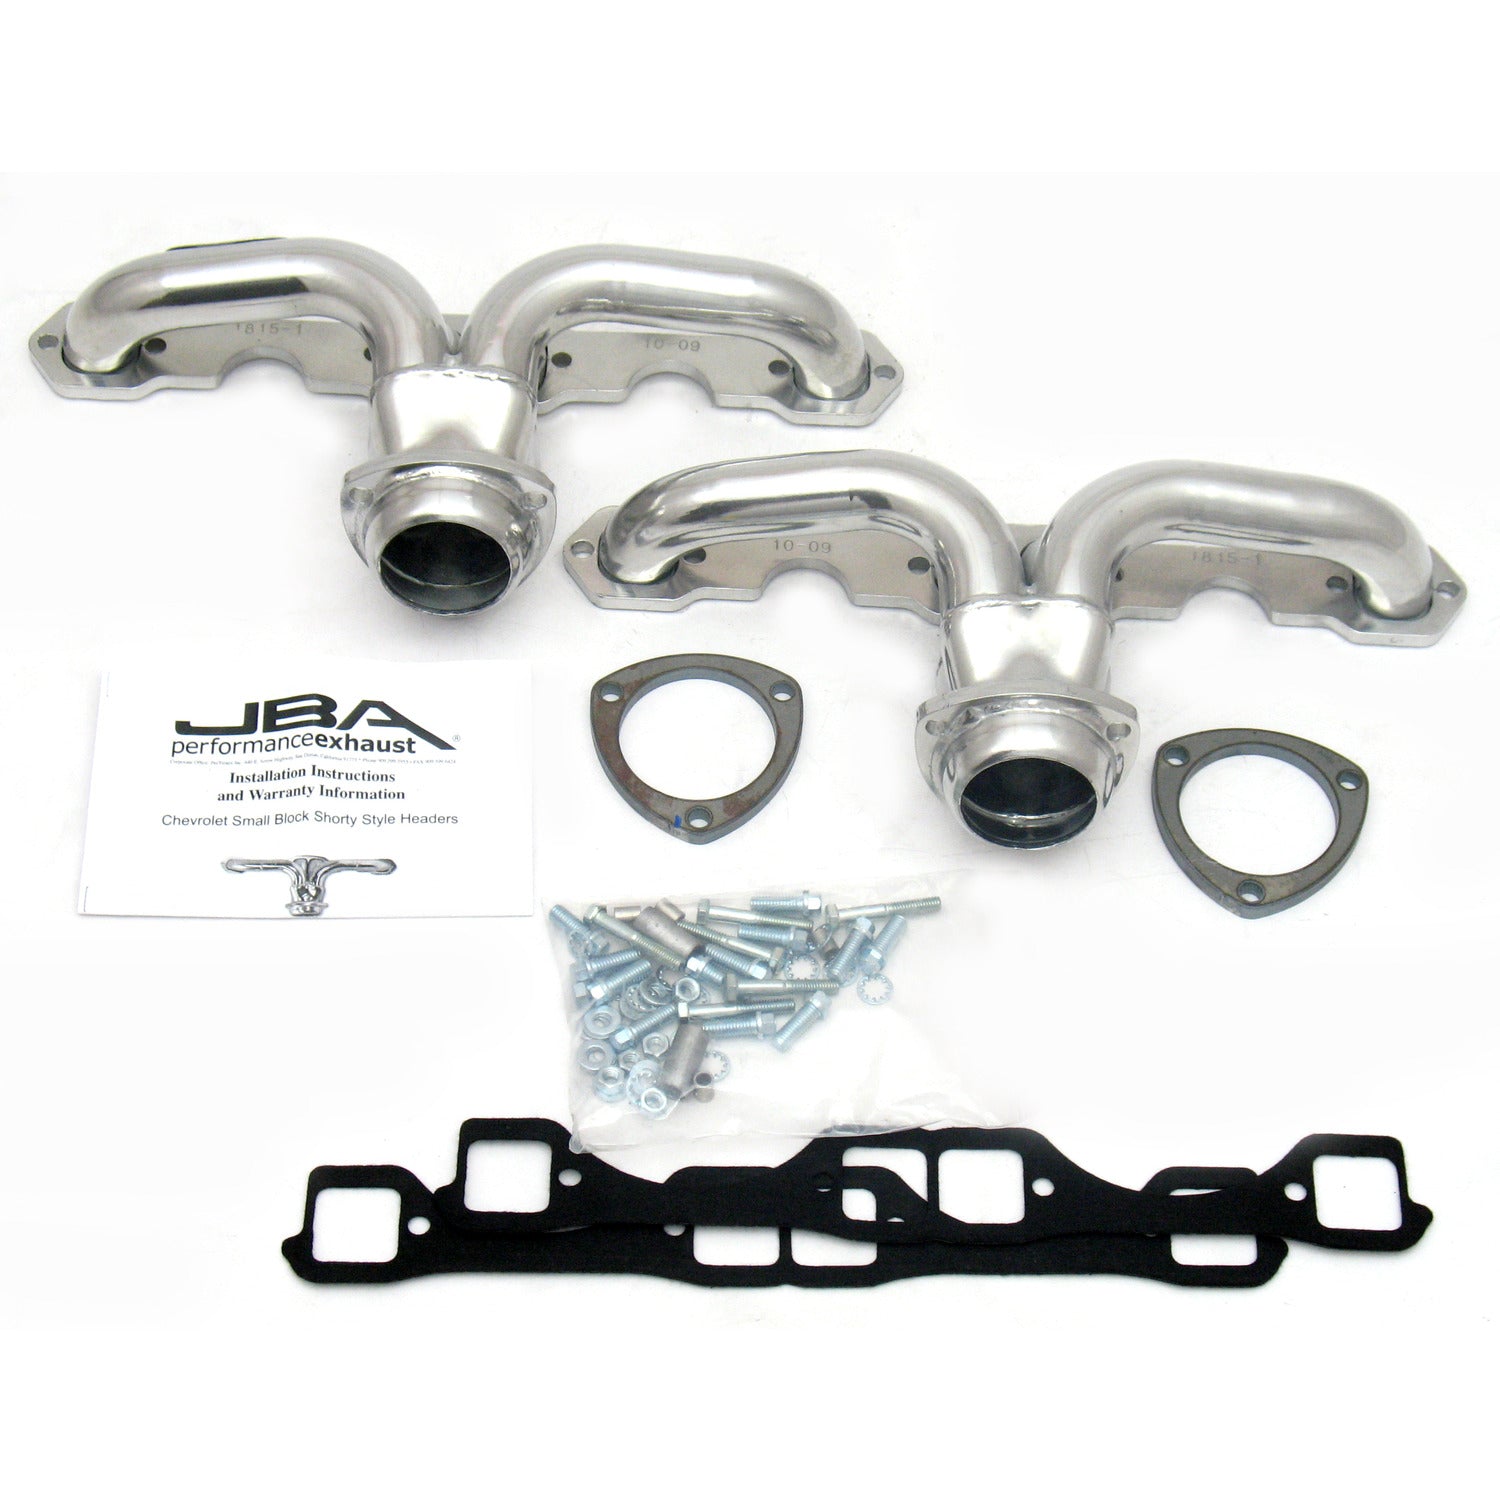 JBA Performance Exhaust 1815S-1JS 1 5/8" Header Shorty Stainless Steel Chev Center Exit Pre-LT1 Heads Silver Ceramic